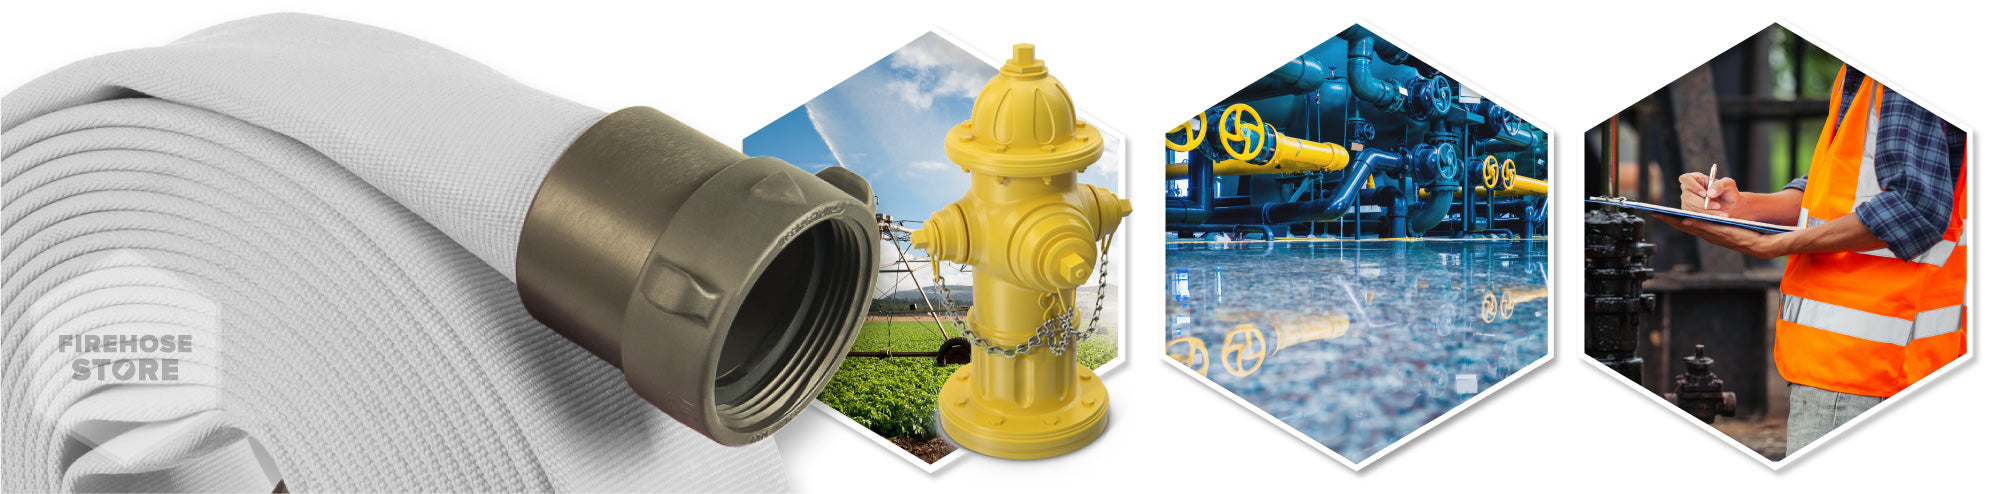 1-1-2 Inch x 75 Feet Fire Hydrant Hose Graphic Overview